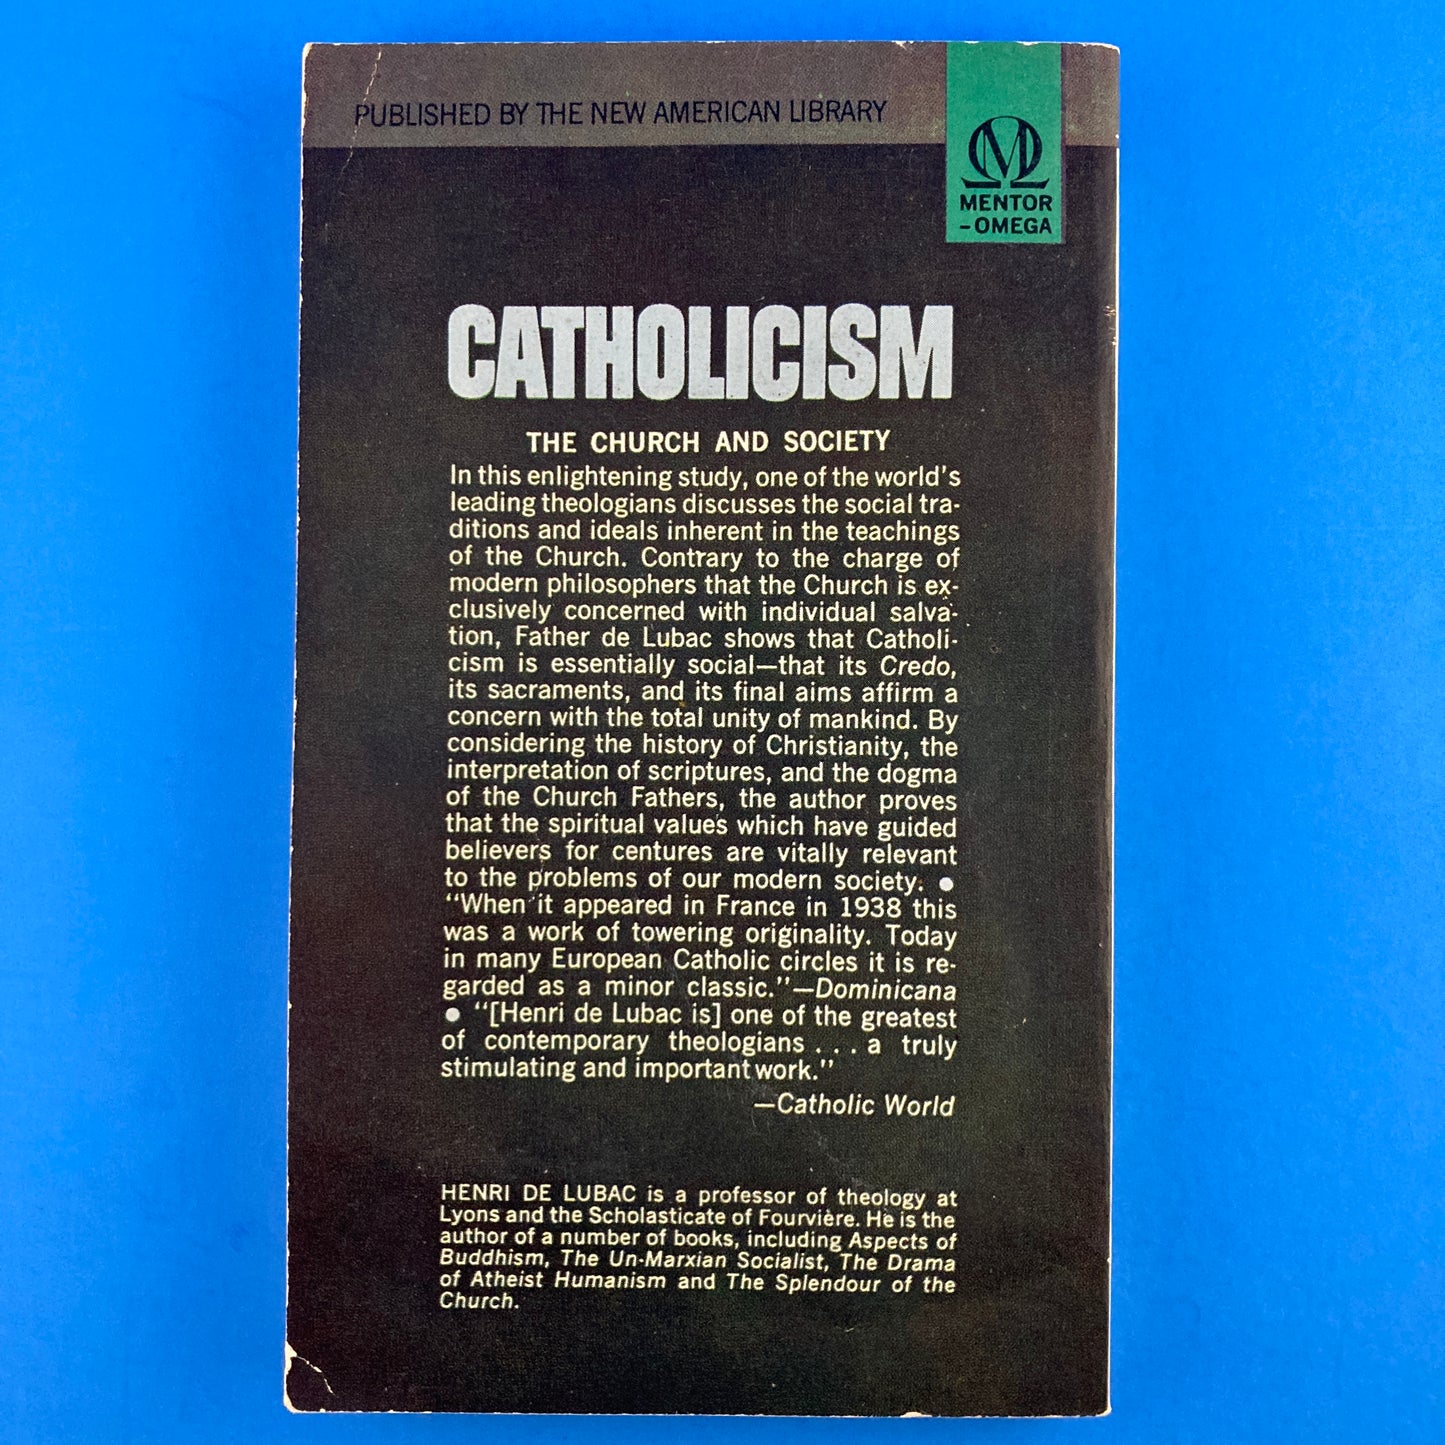 Catholicism: A Study of Dogma in Relation to the Corporate Destiny of Mankind